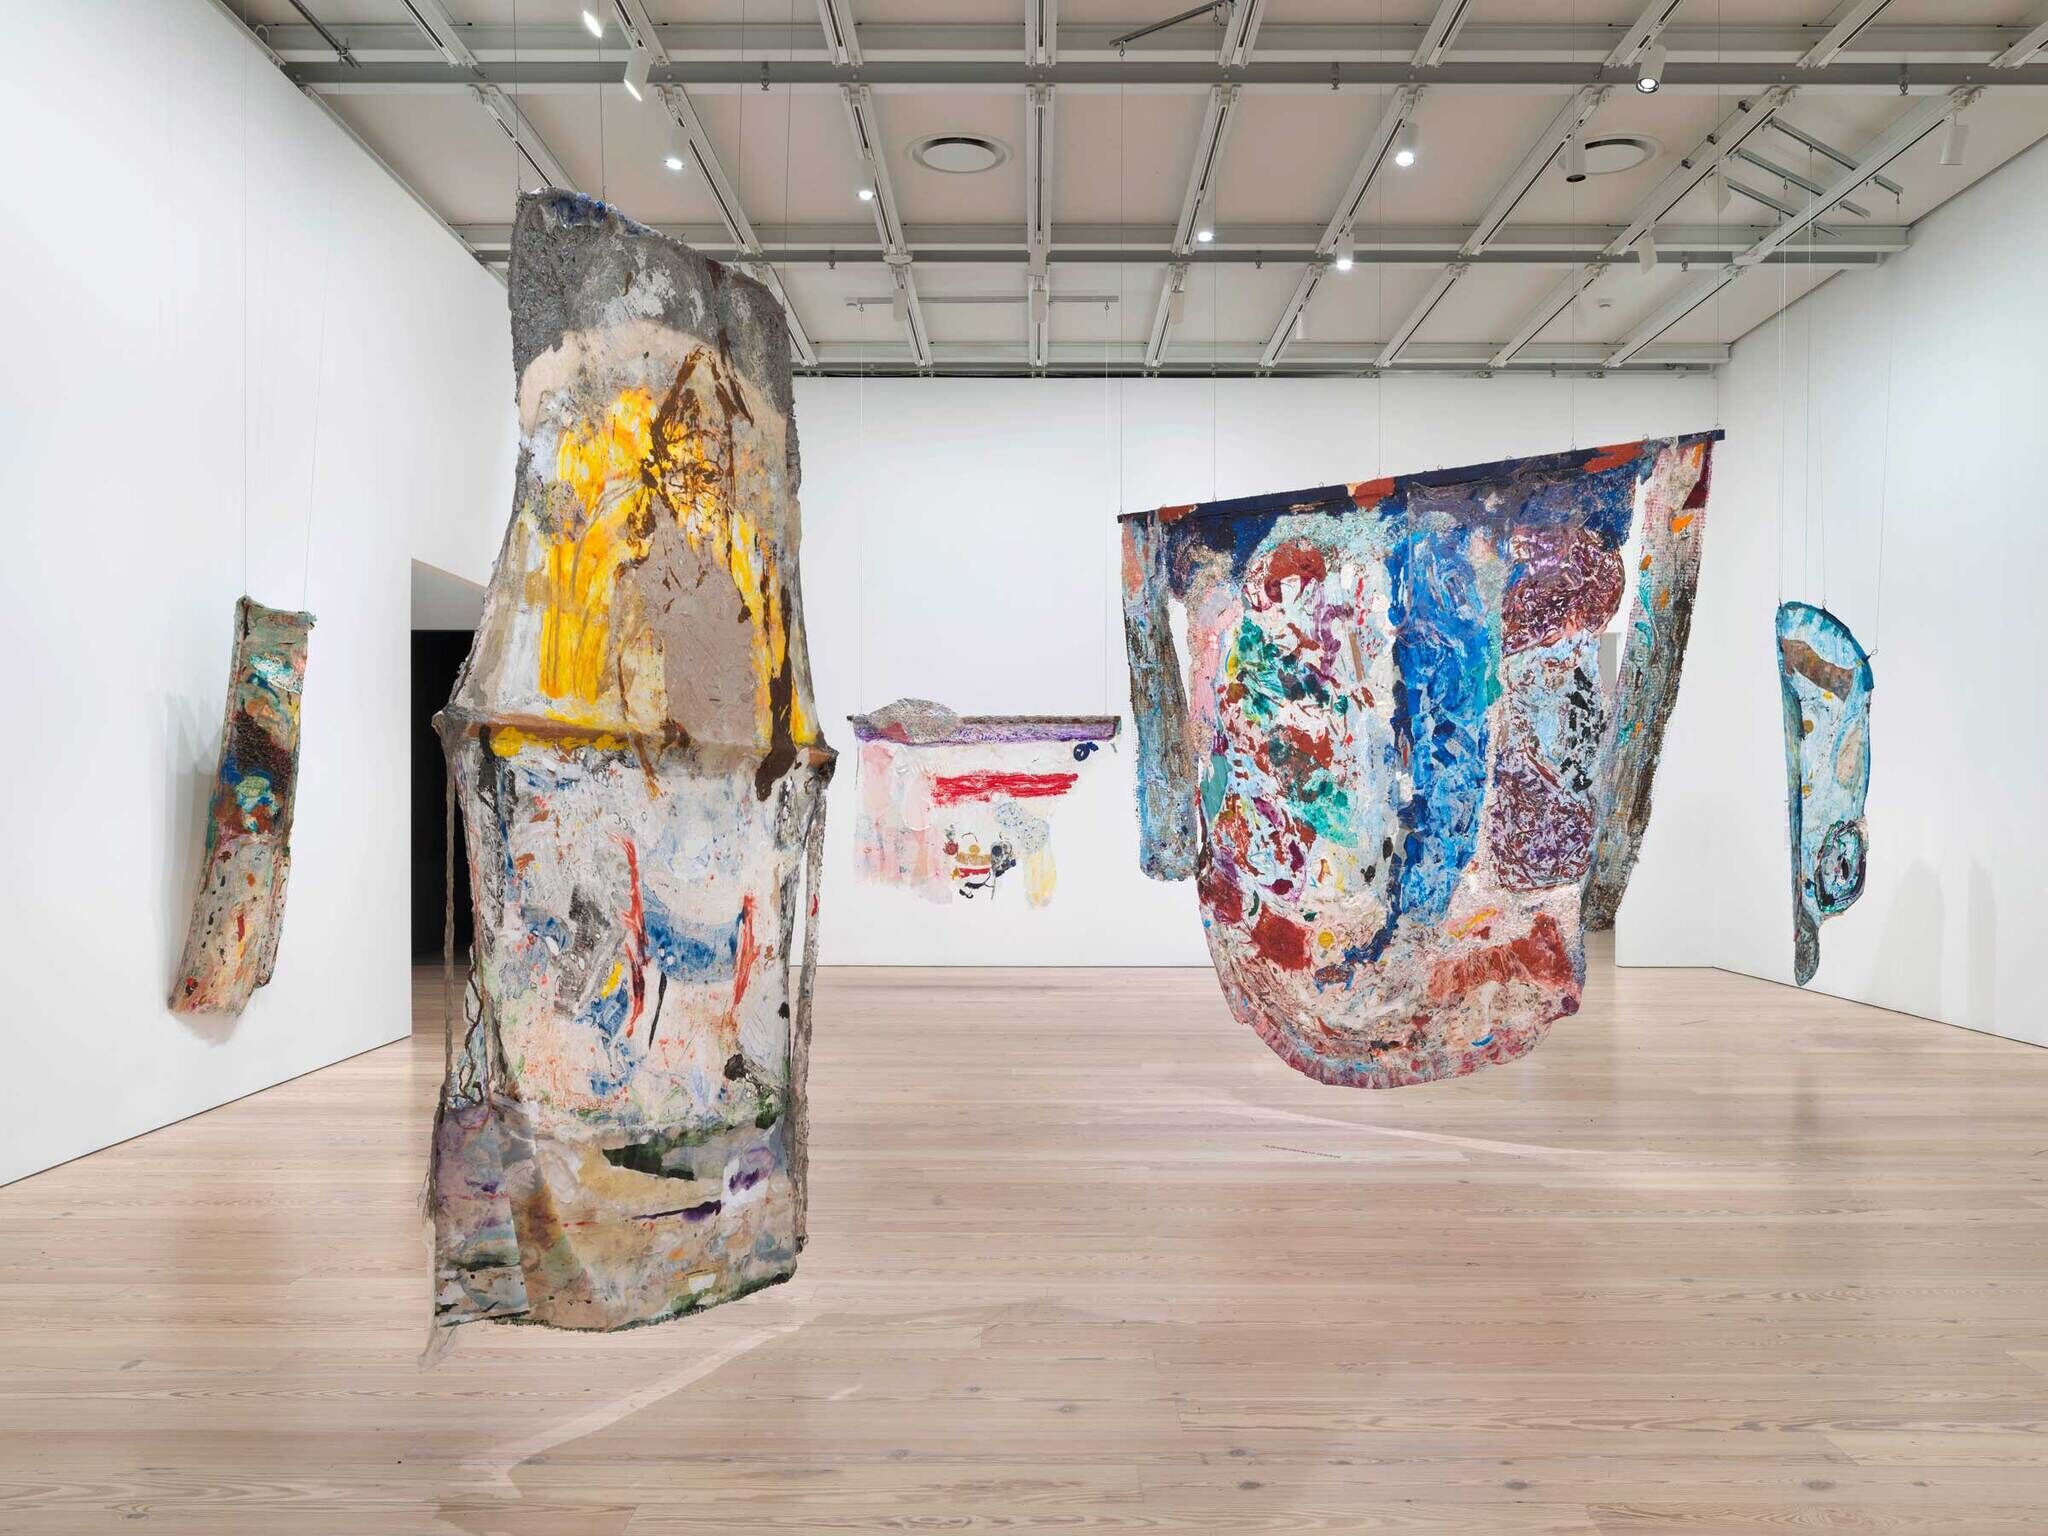 Abstract painted sculptures suspended in a modern art gallery setting.